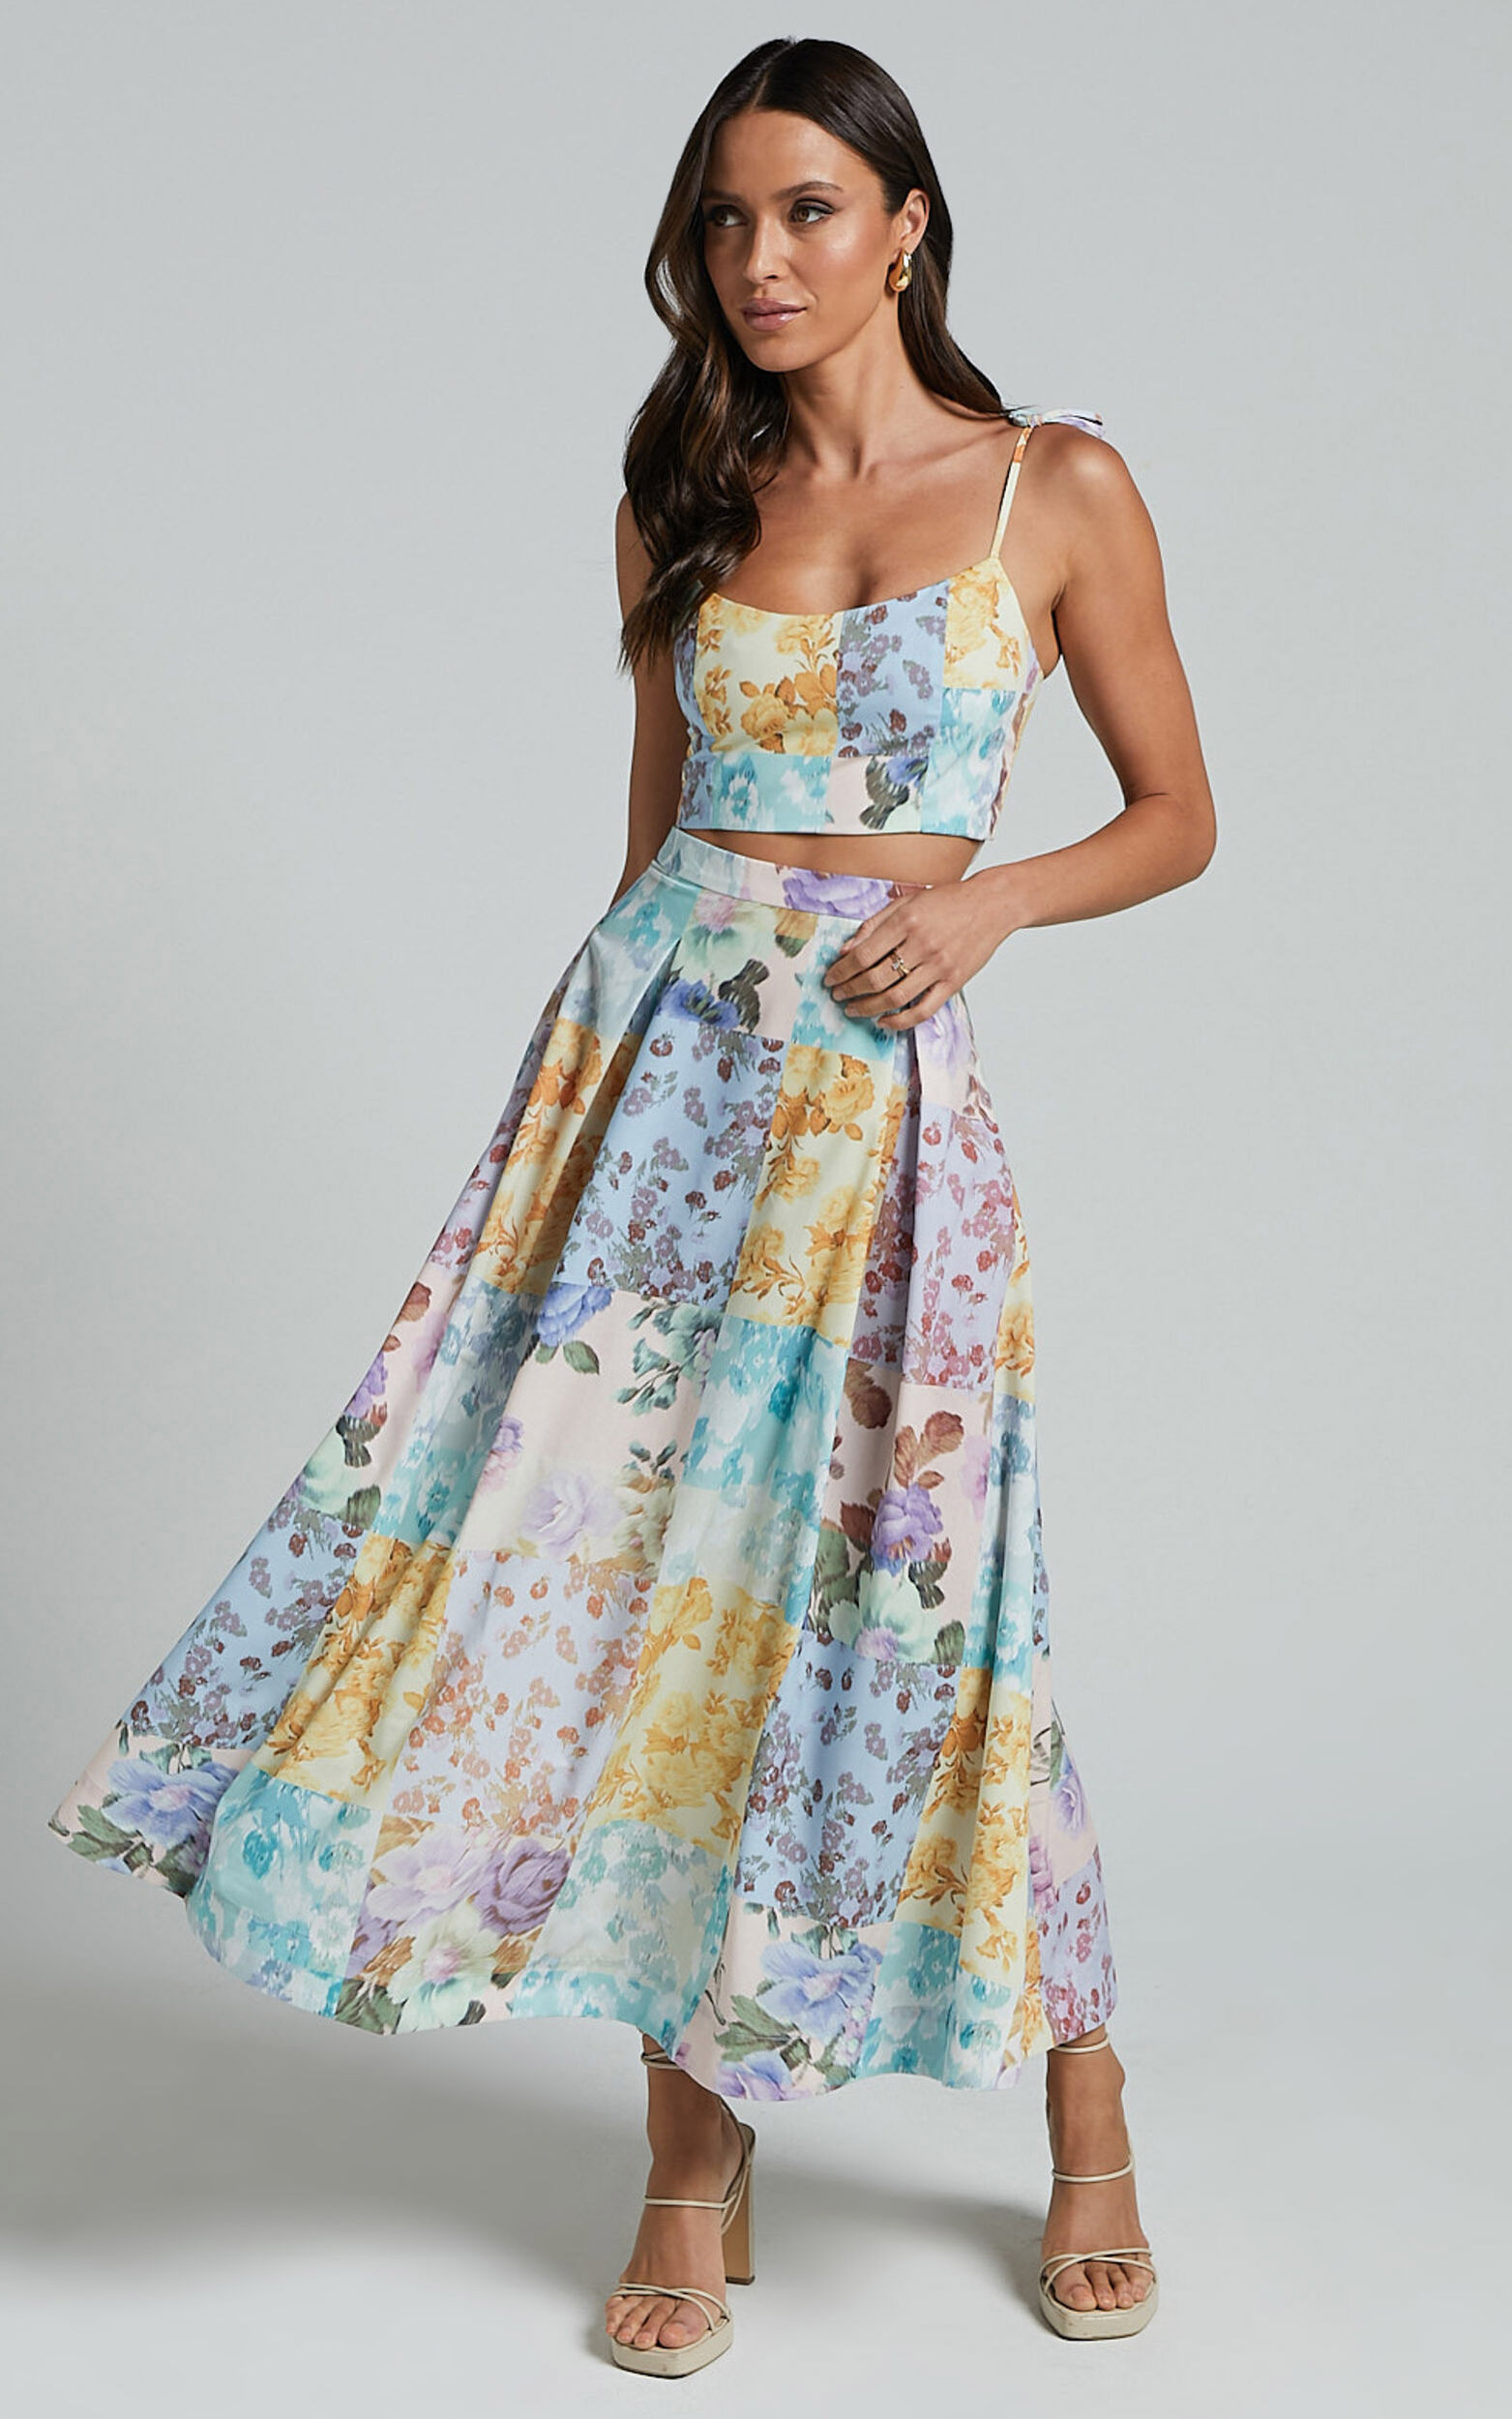 Rosalee Two Piece Set - Strappy Crop Top and High Waisted A Line Midi Skirt  Set in Vintage Floral